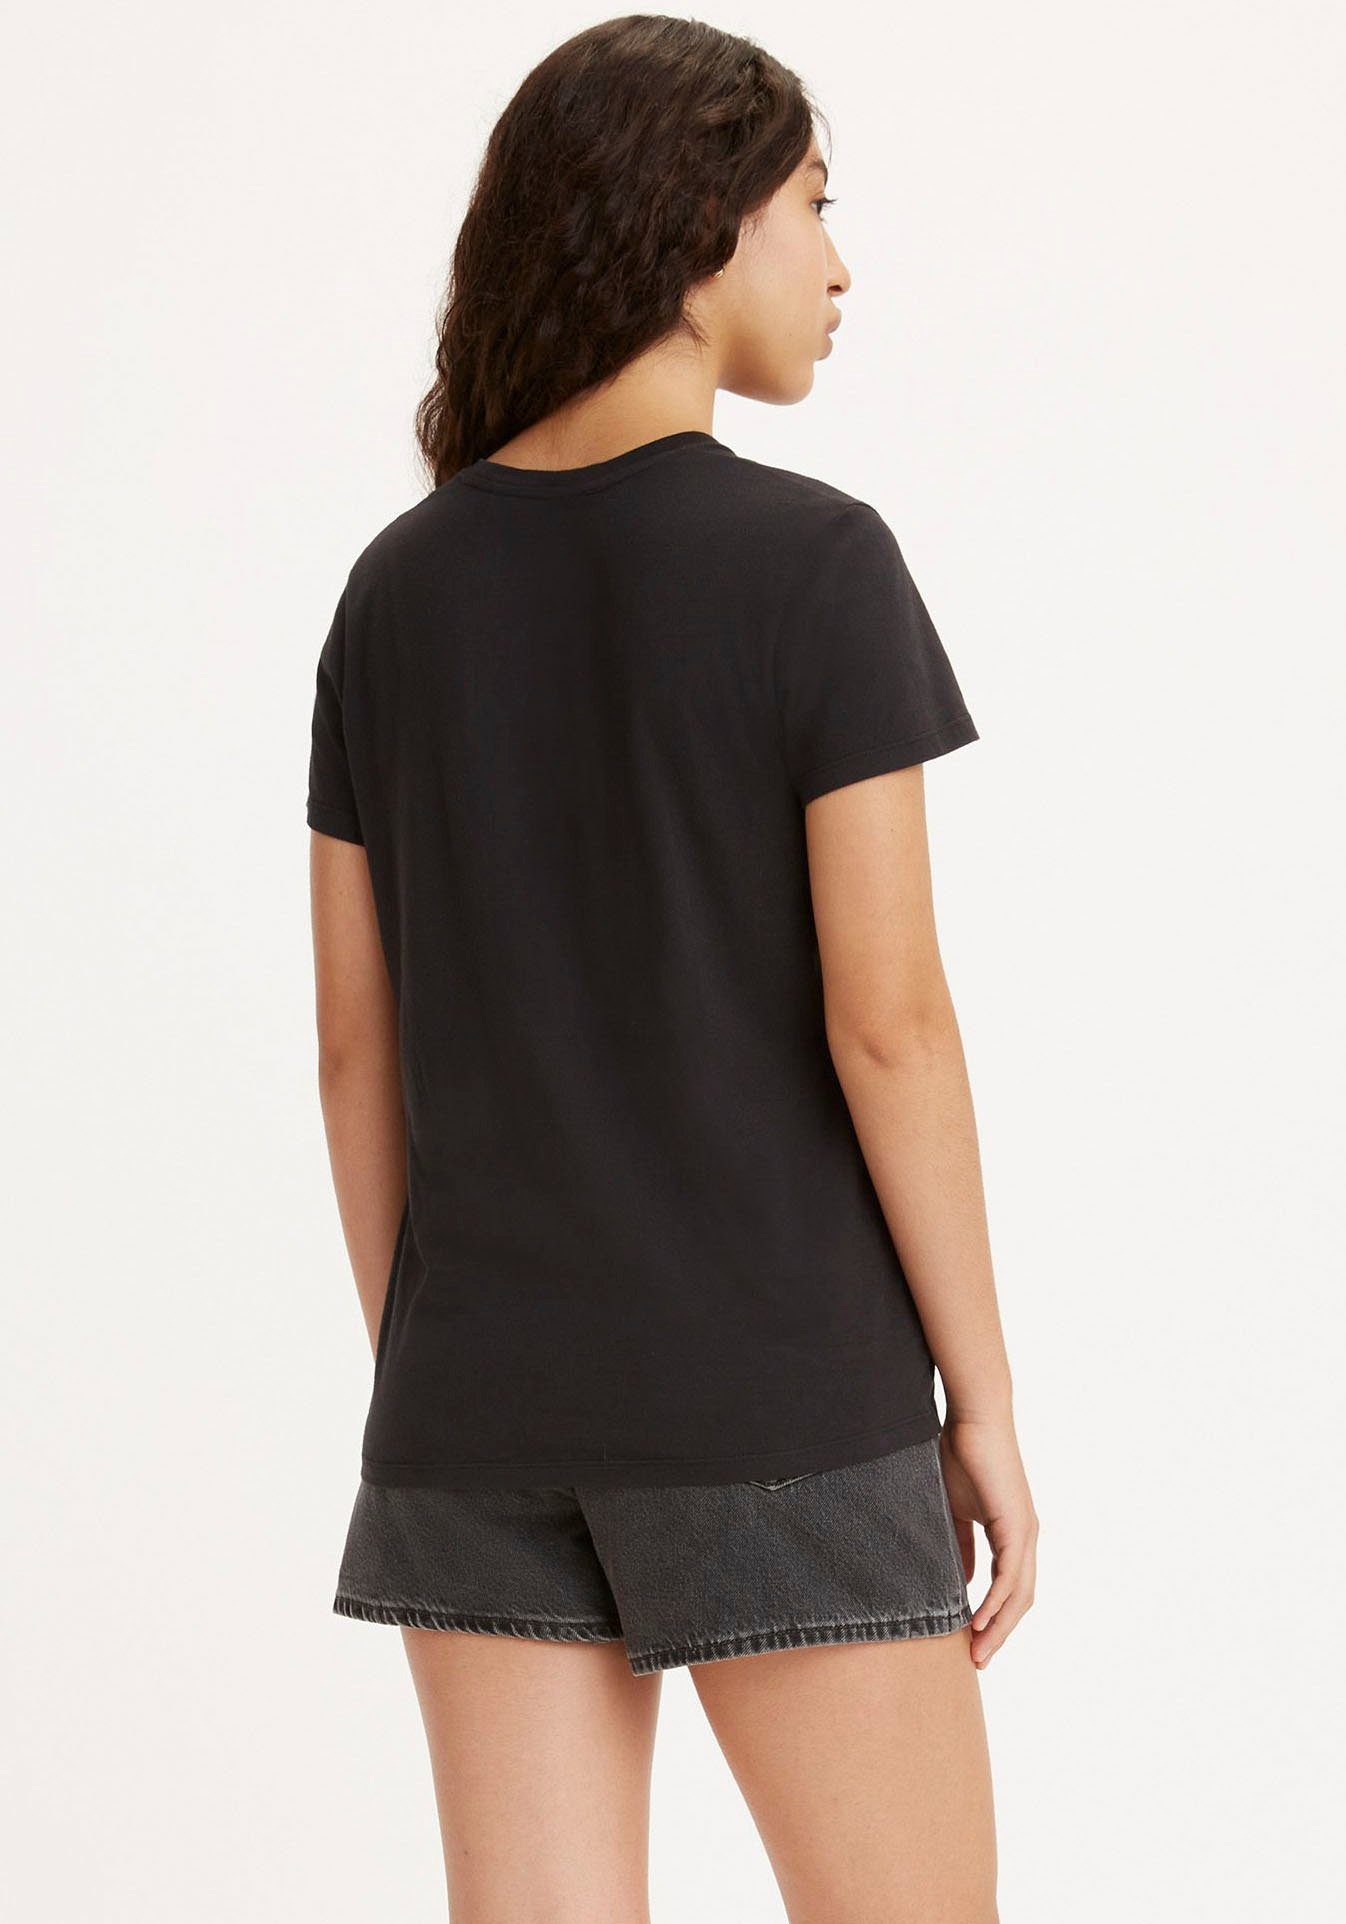 FILL FLORAL THE MARA Levi's® BW PERFECT LSE TEE T-Shirt